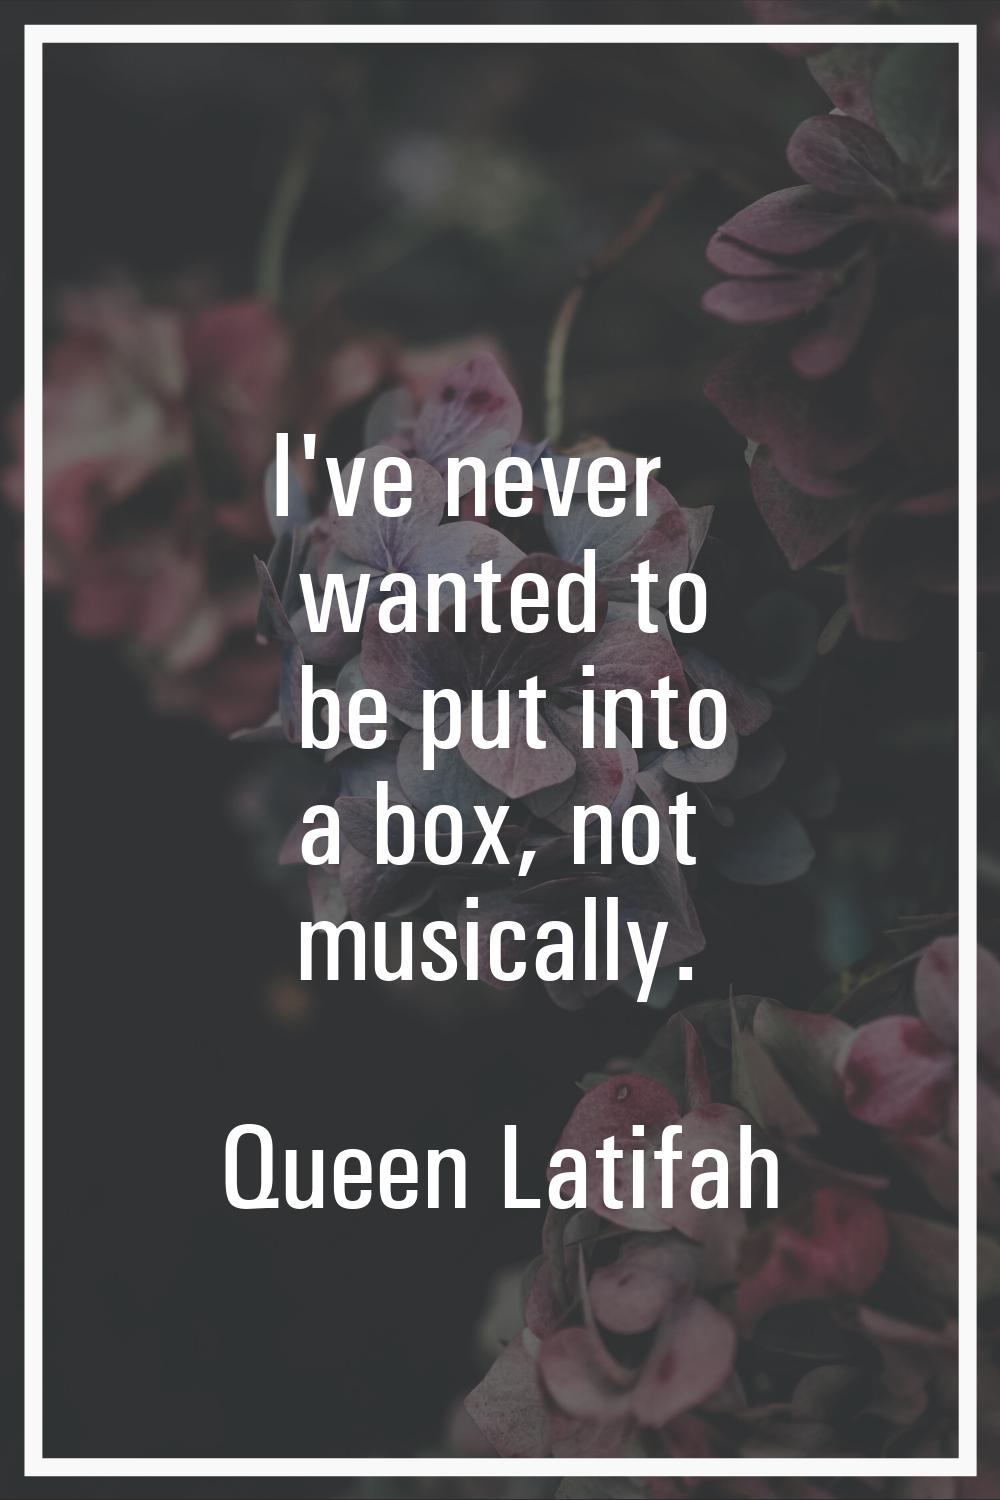 I've never wanted to be put into a box, not musically.